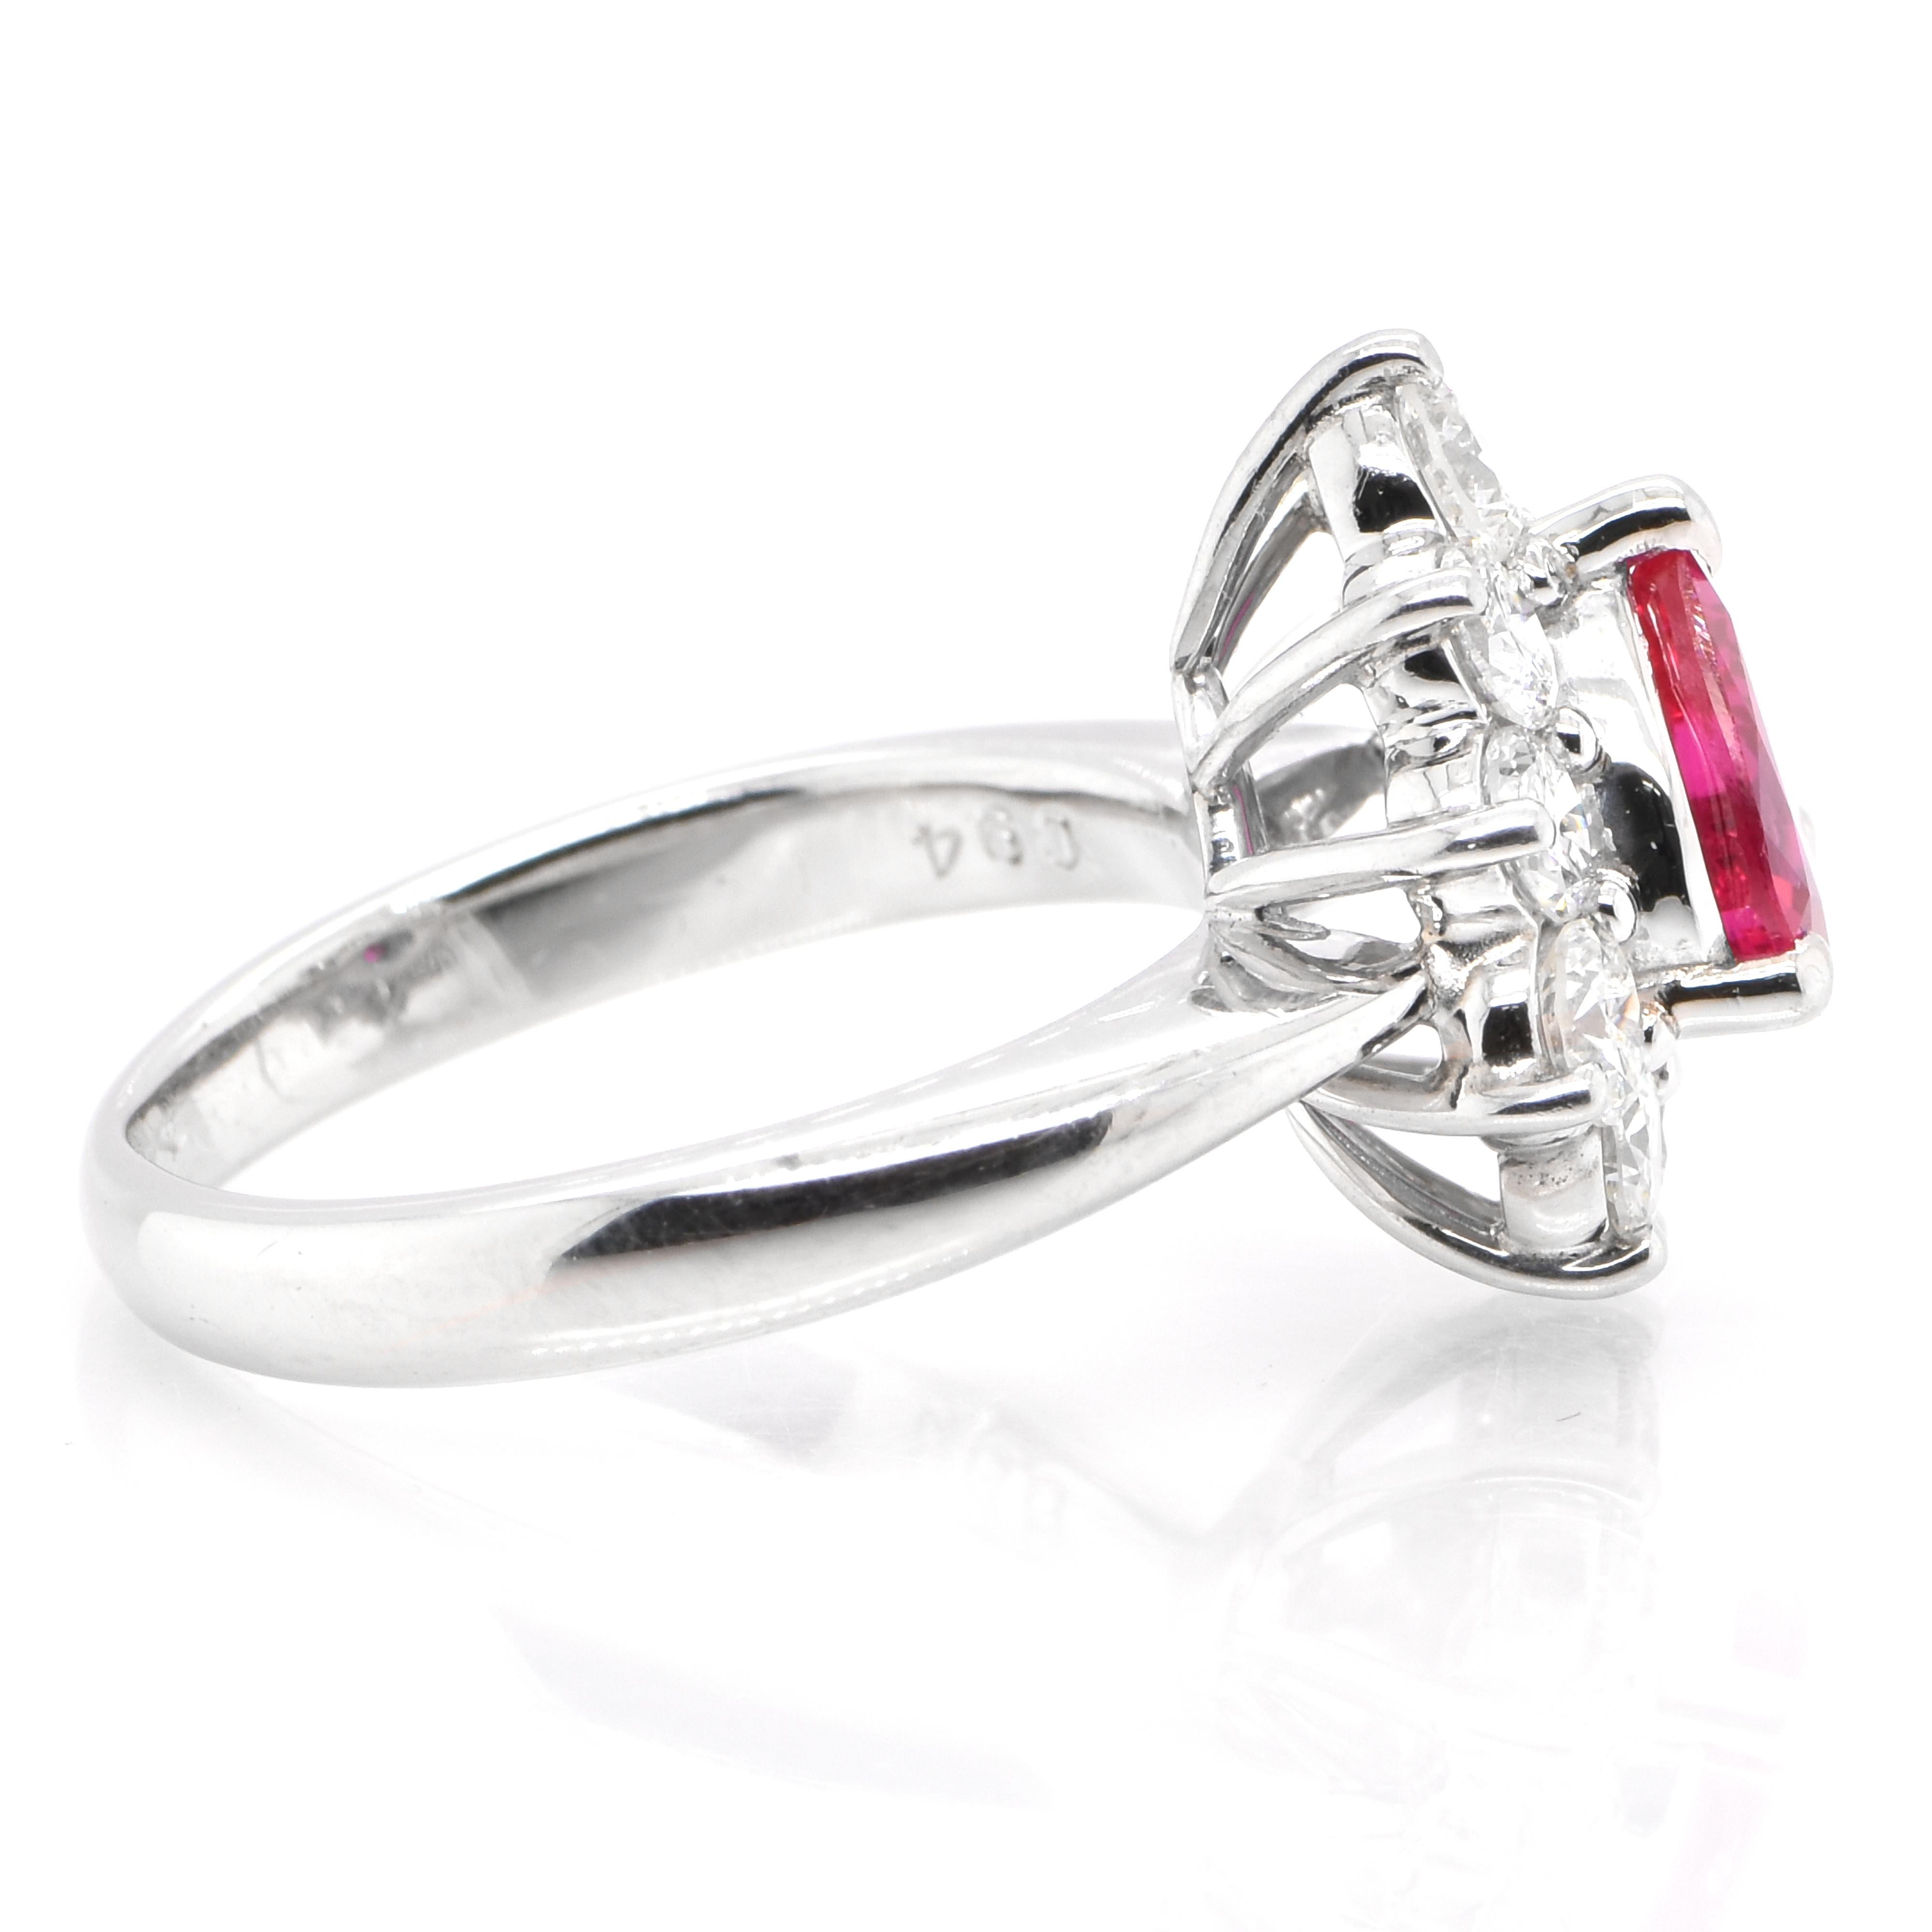 Women's 1.11 Carat Natural Pear Cut Ruby and Diamond Ring Set in Platinum